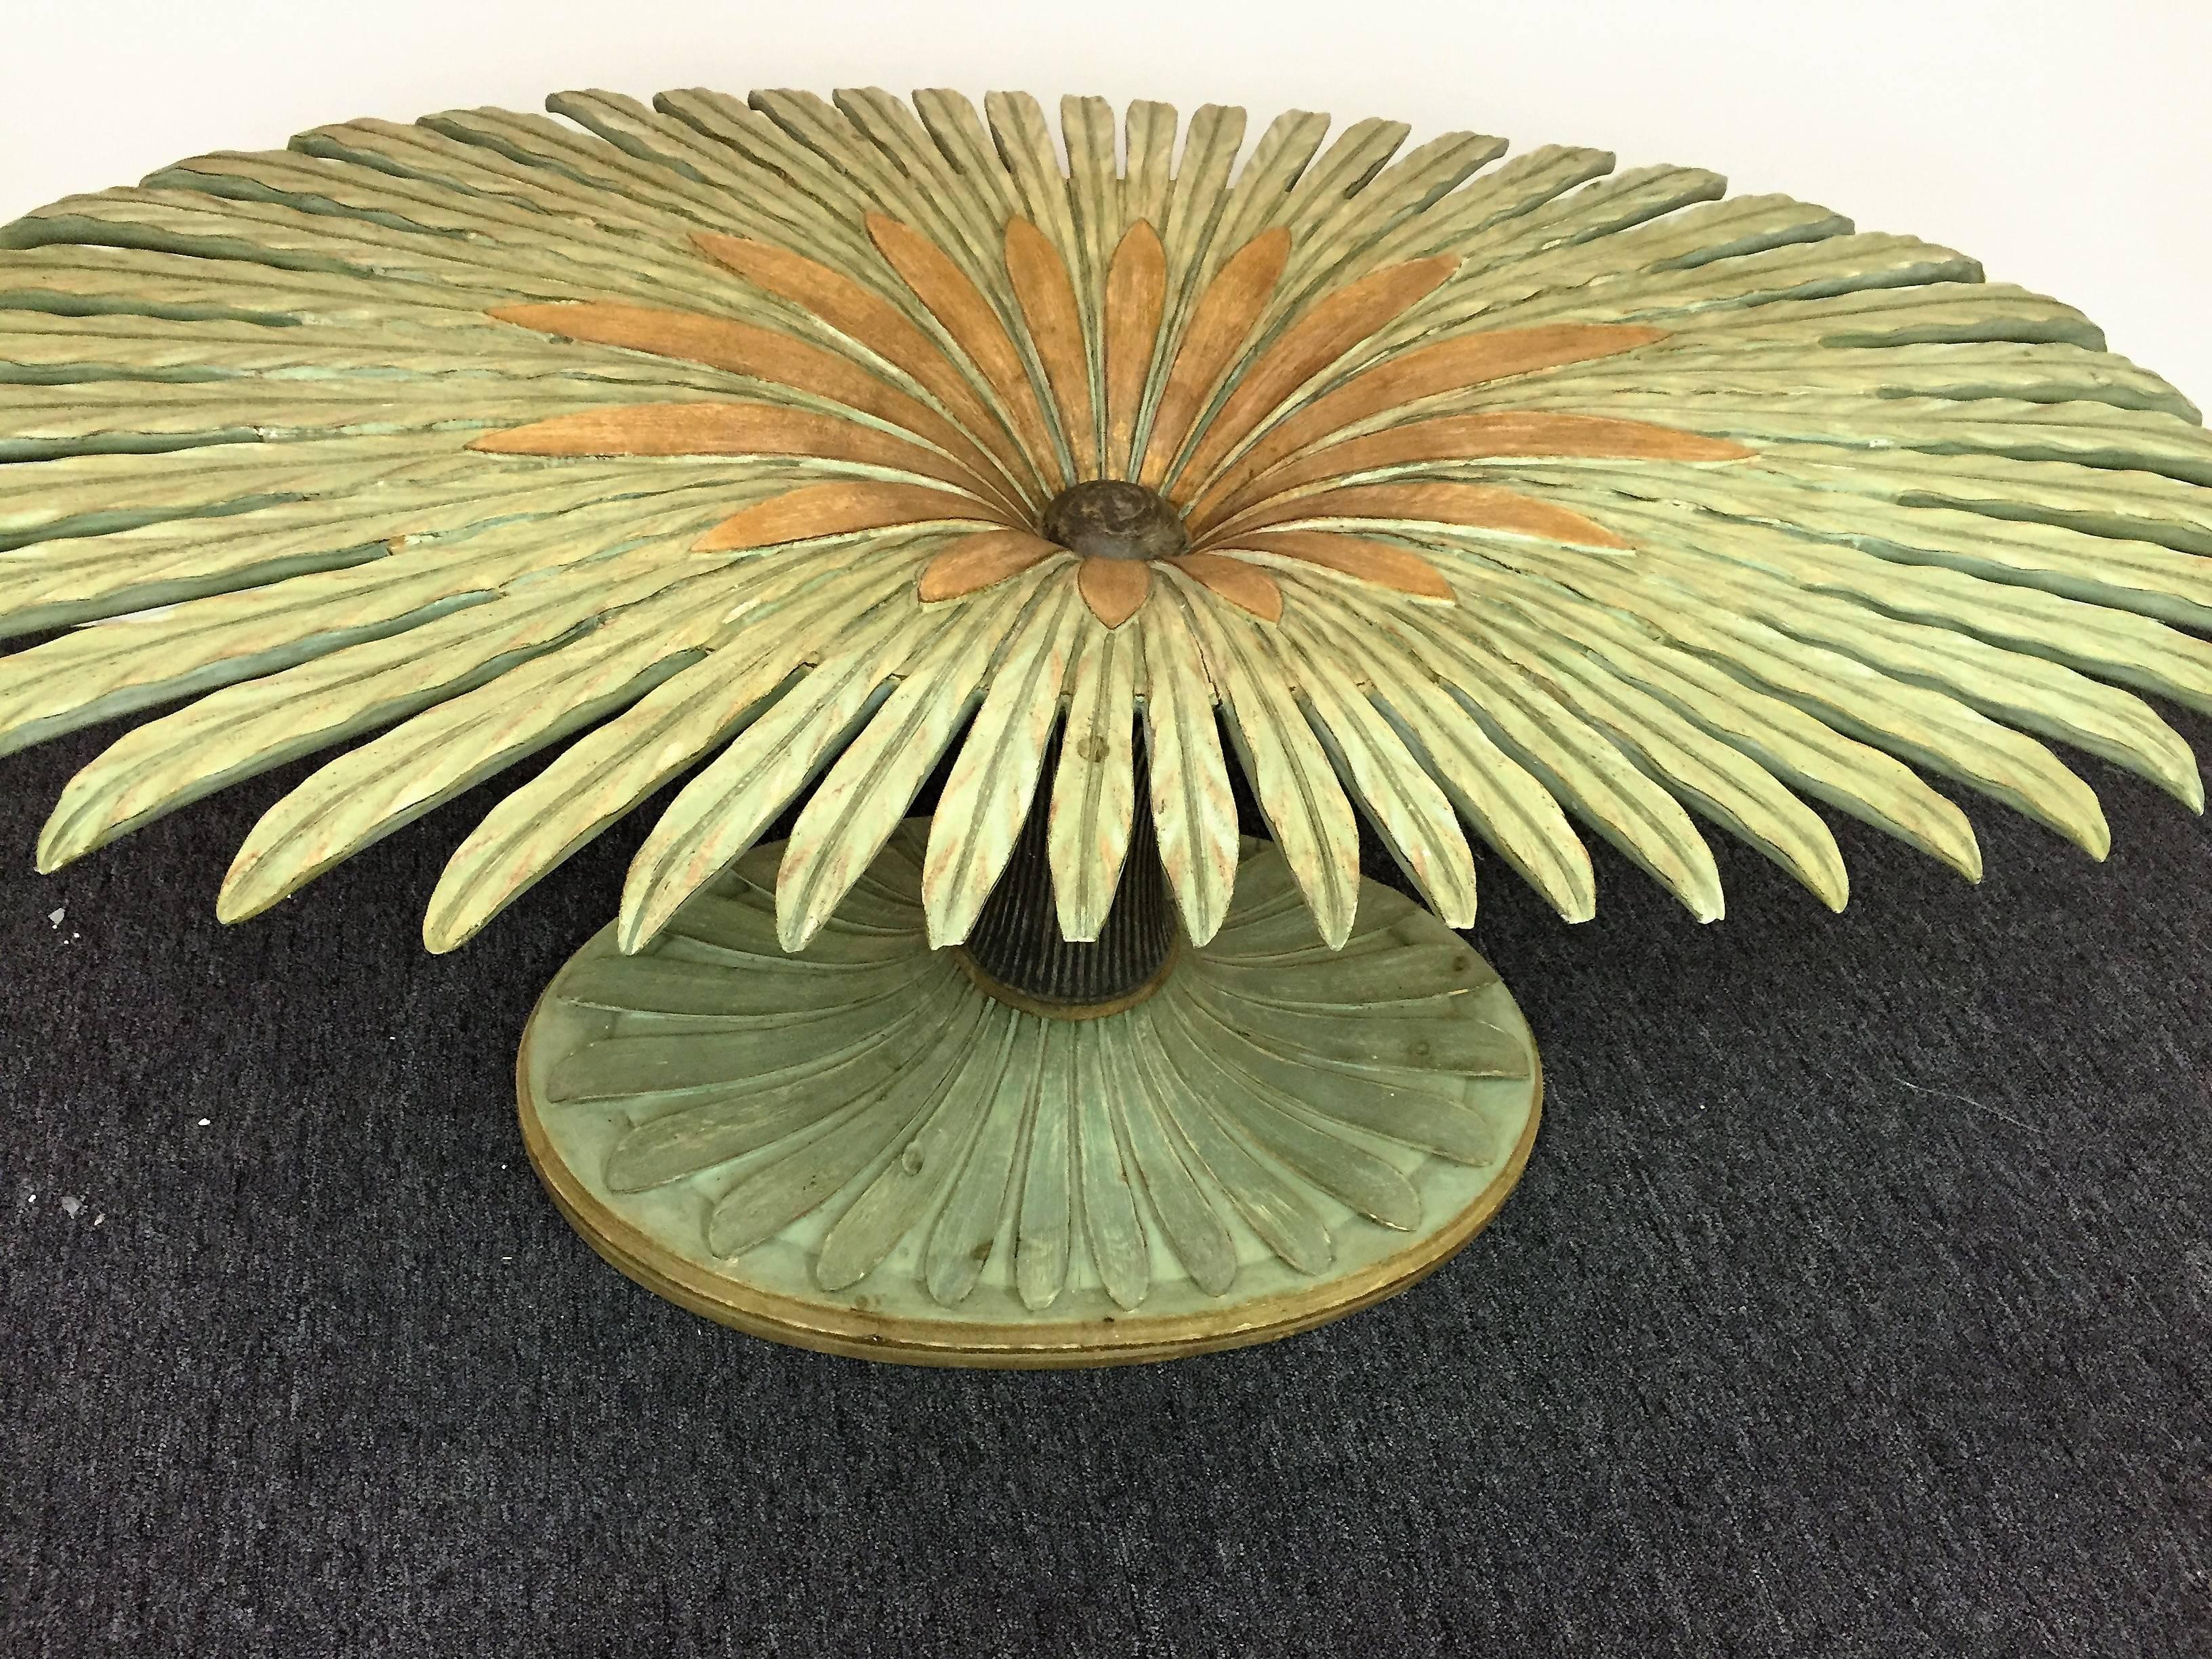 Highly decorative and intricately carved floral form table comprised of wood with a light green and gold applied finish. In the form of a majestic full bloomed flower, this table is inspired by the work of French artist and designer Serge Roche. It